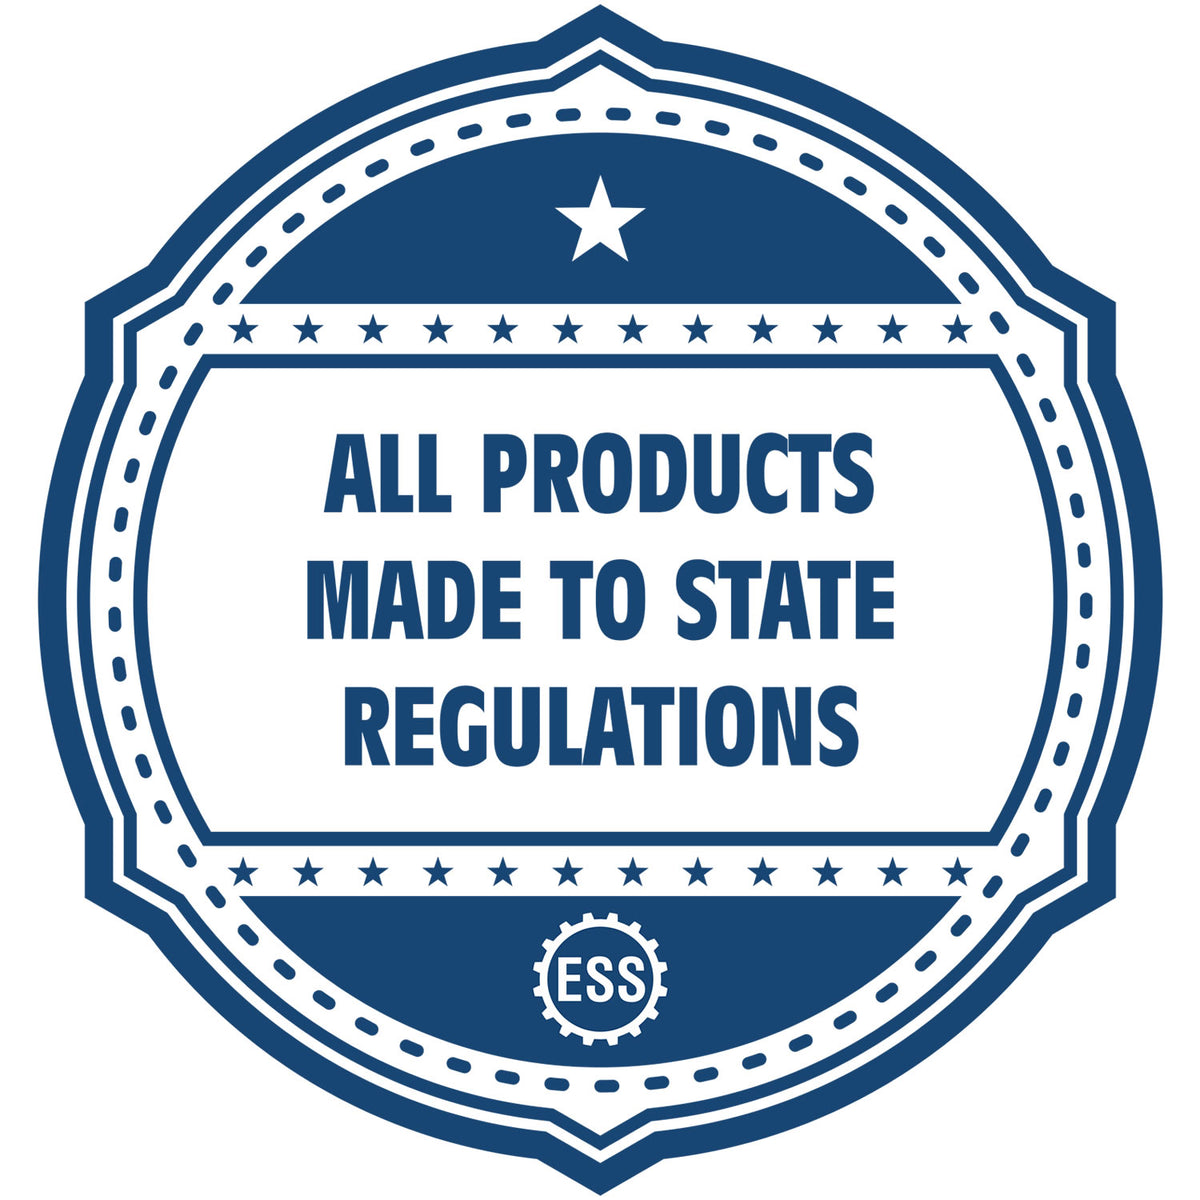 A blue icon or badge for the Gift Michigan Architect Seal showing that this product is made in compliance with state regulations.